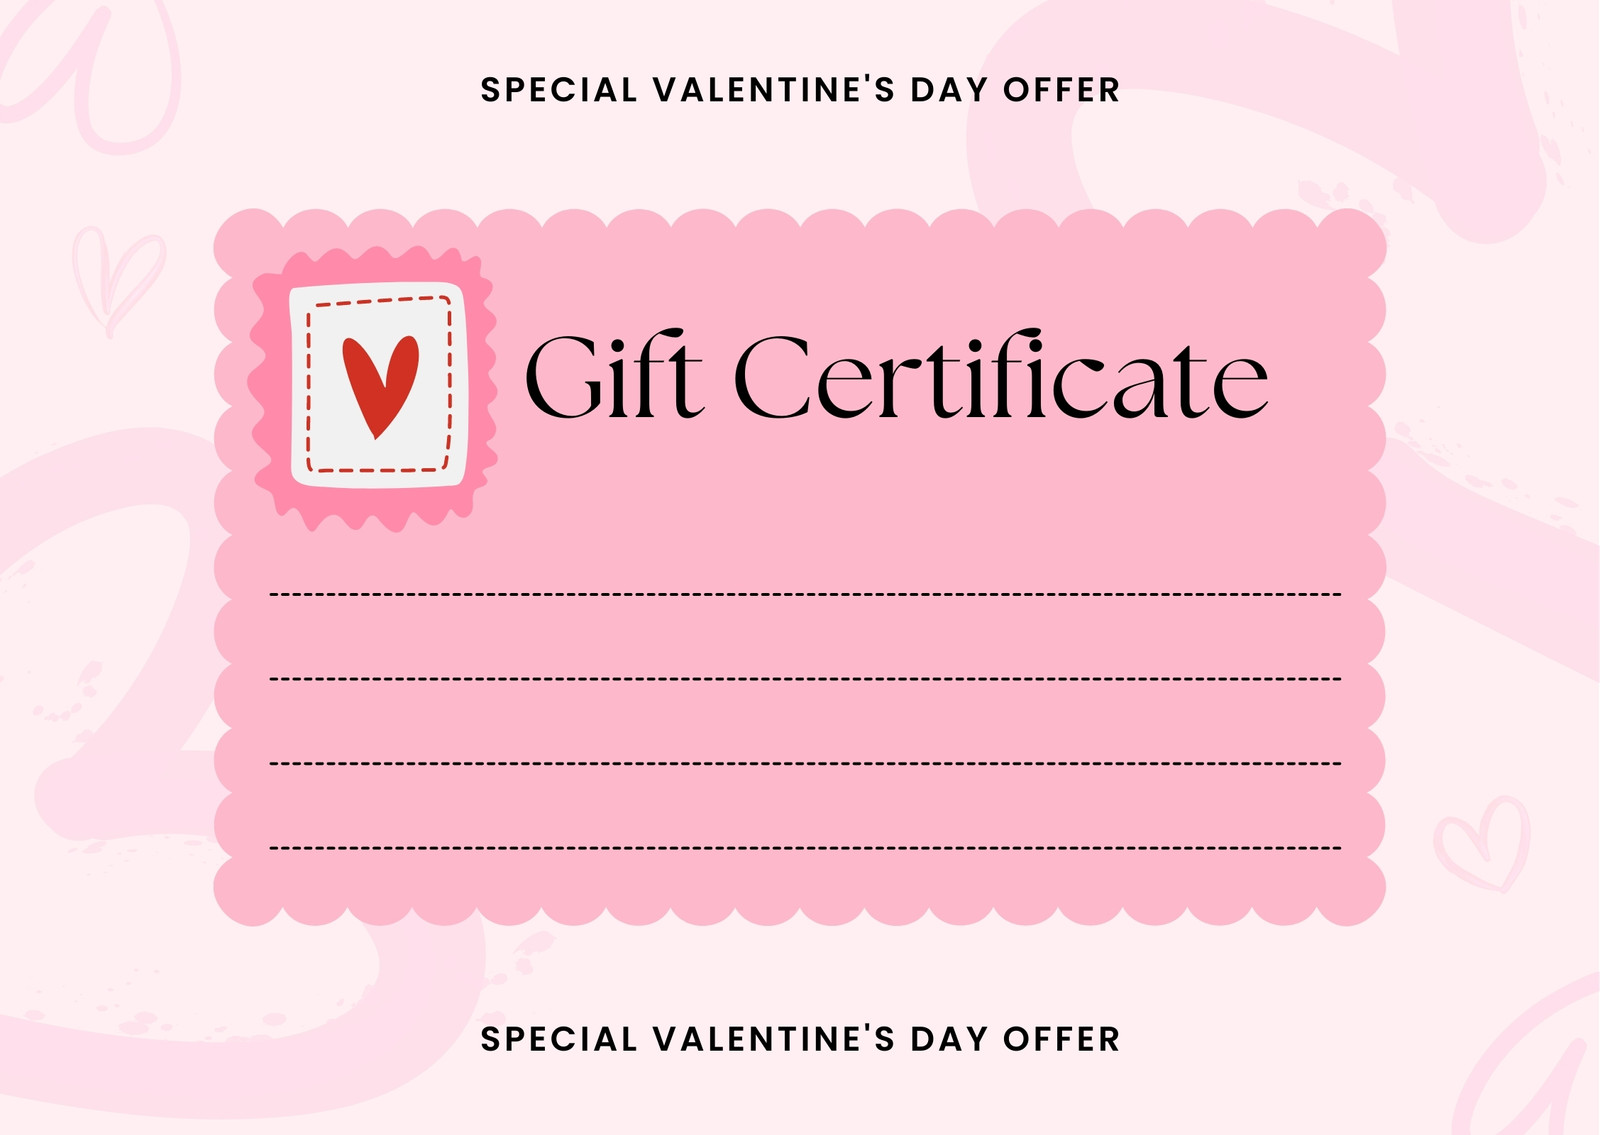 Gift Certificates - Deal of the Day